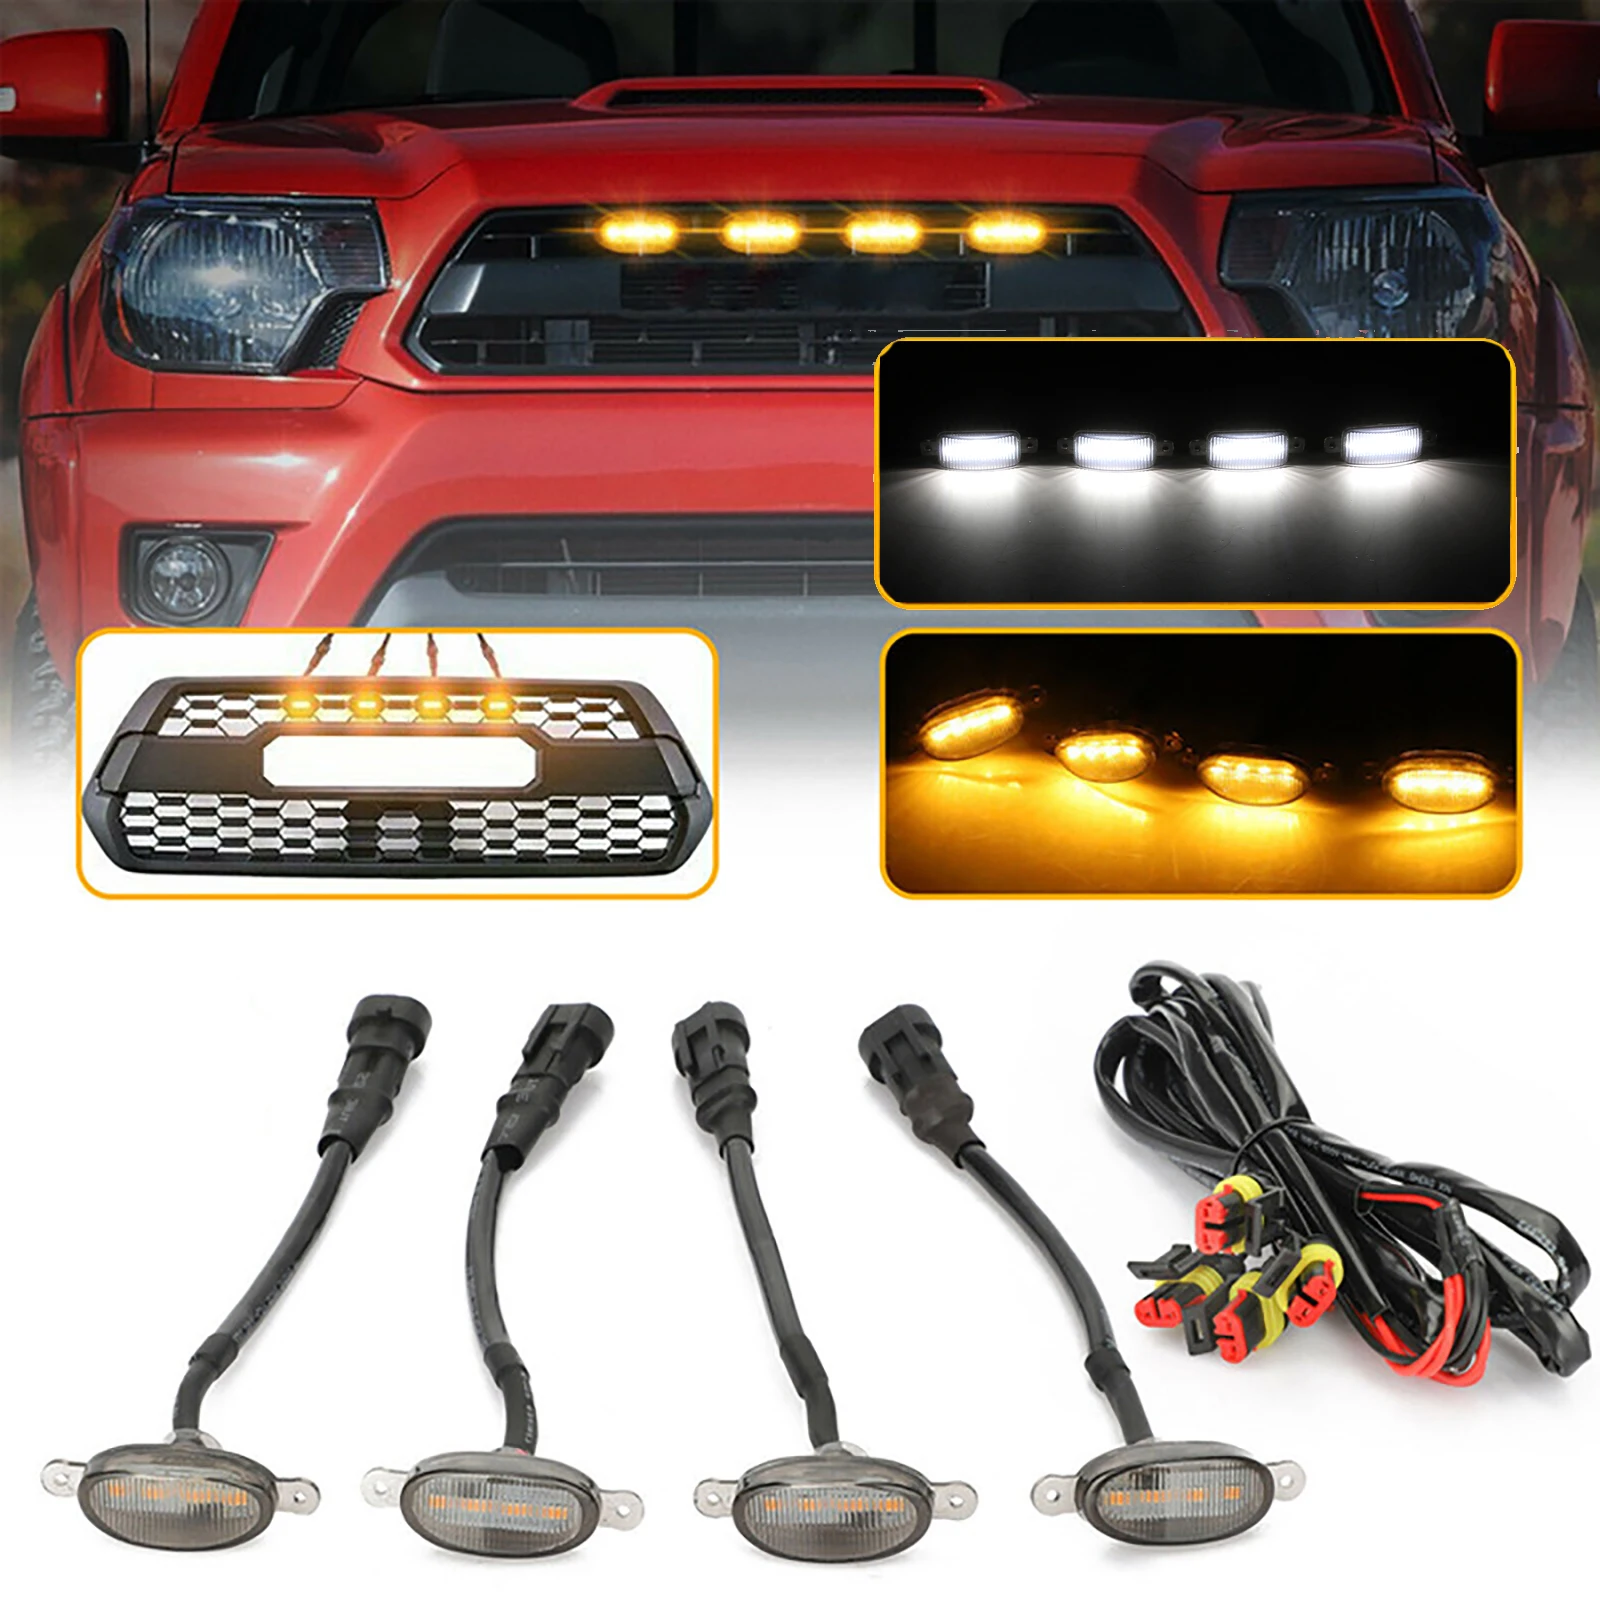 

LED Grille Light Universal Car Smoked Amber White 4LED Grill Light Lighting Eagle Eye Lamp for Off Road Trunk SUV Ford Toyota